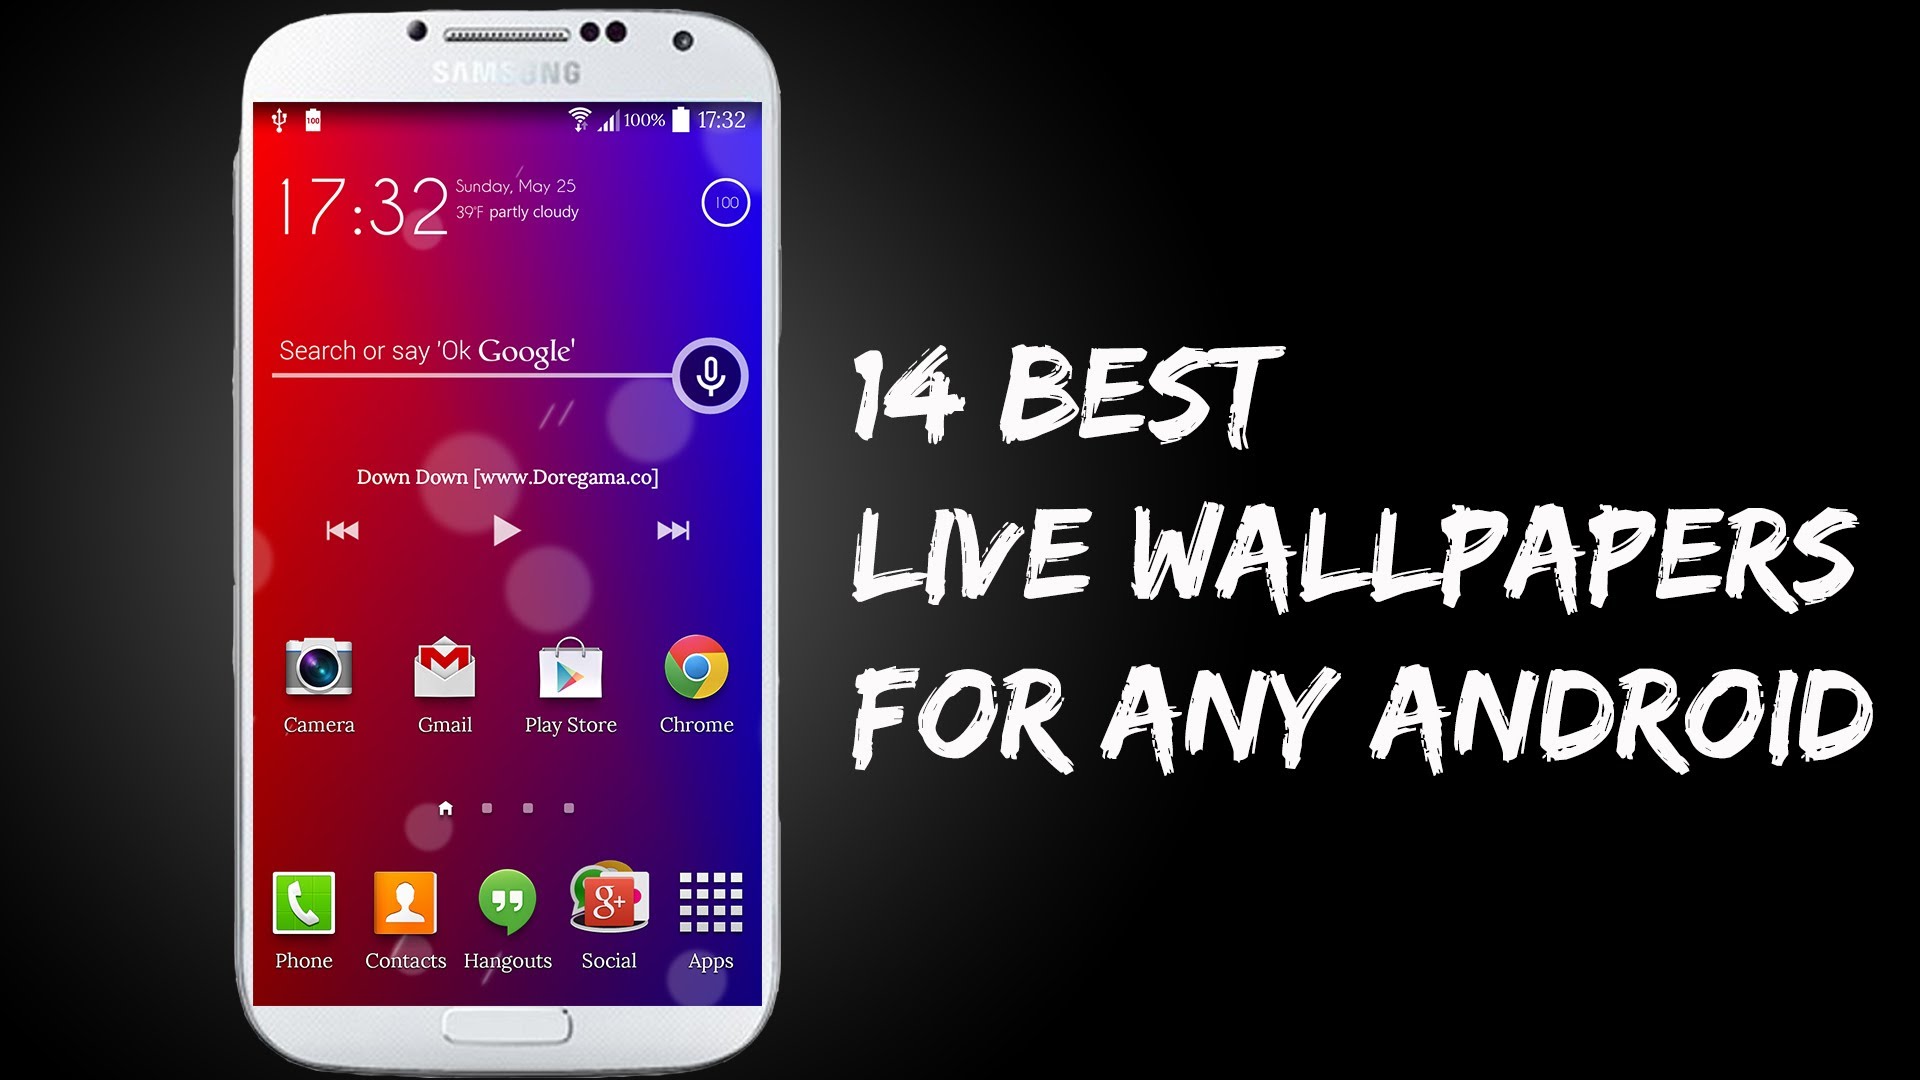 Best Live Wallpaper For Any Android Samsung Galaxy S3 S4 S5 Note3